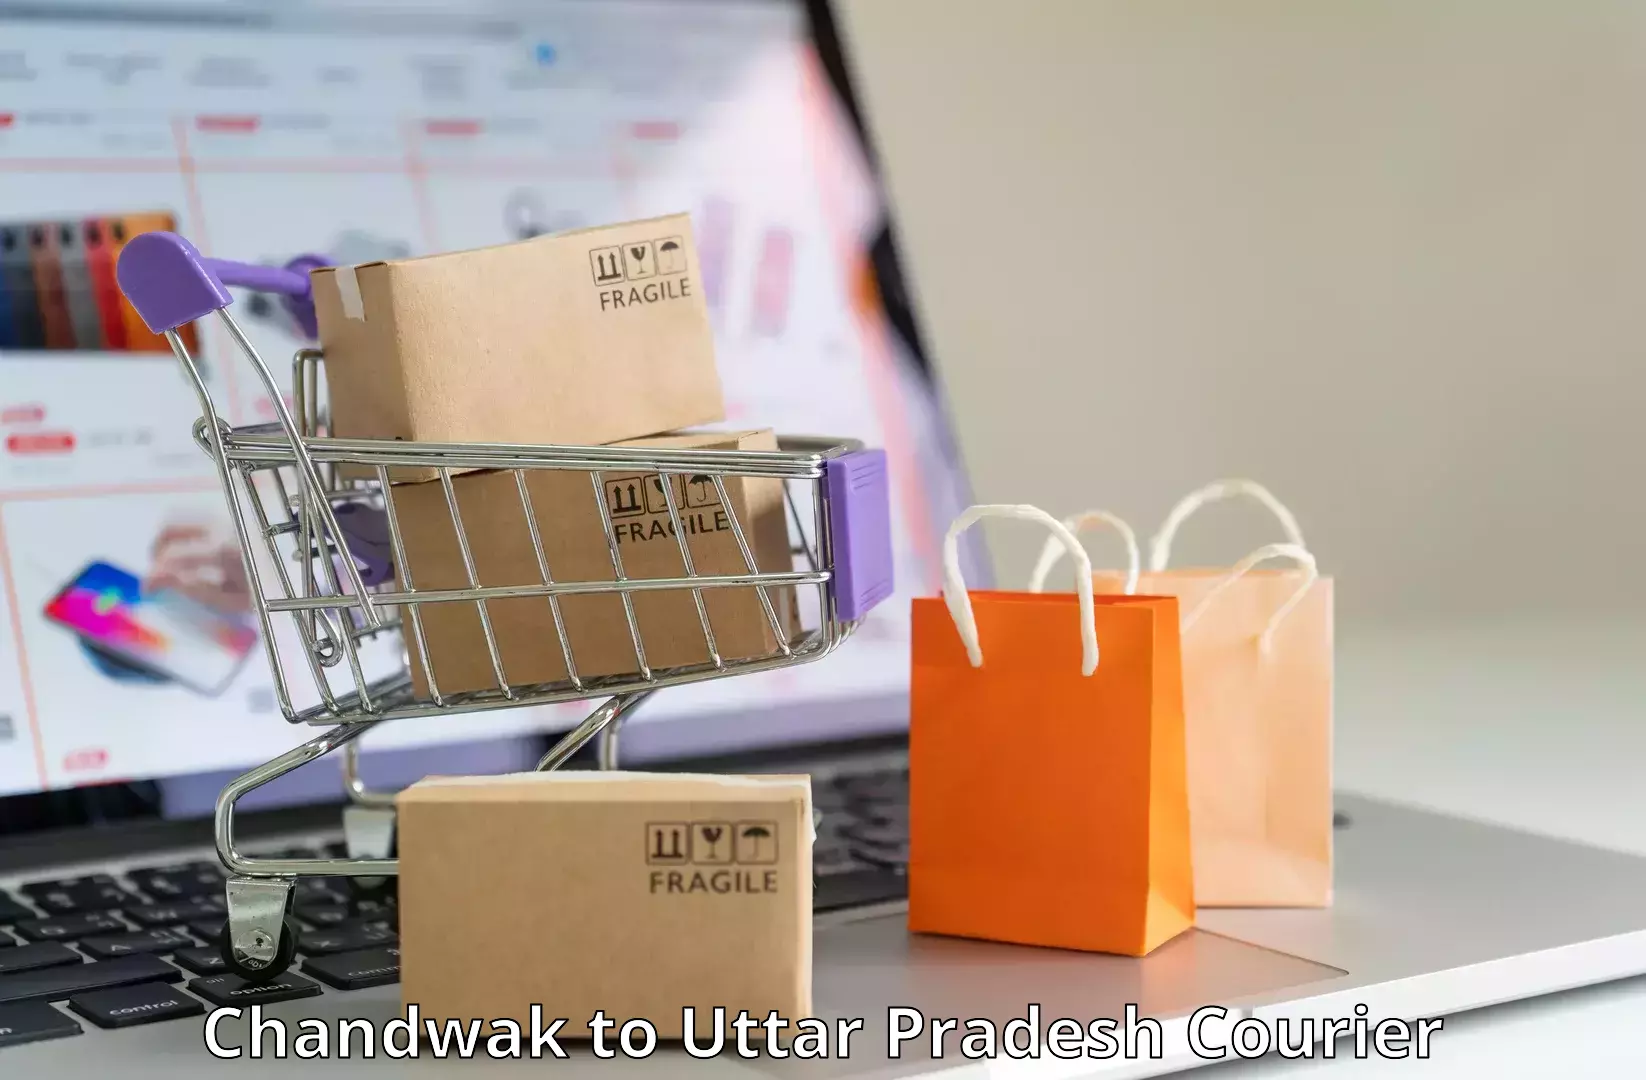 Courier service booking Chandwak to Malihabad